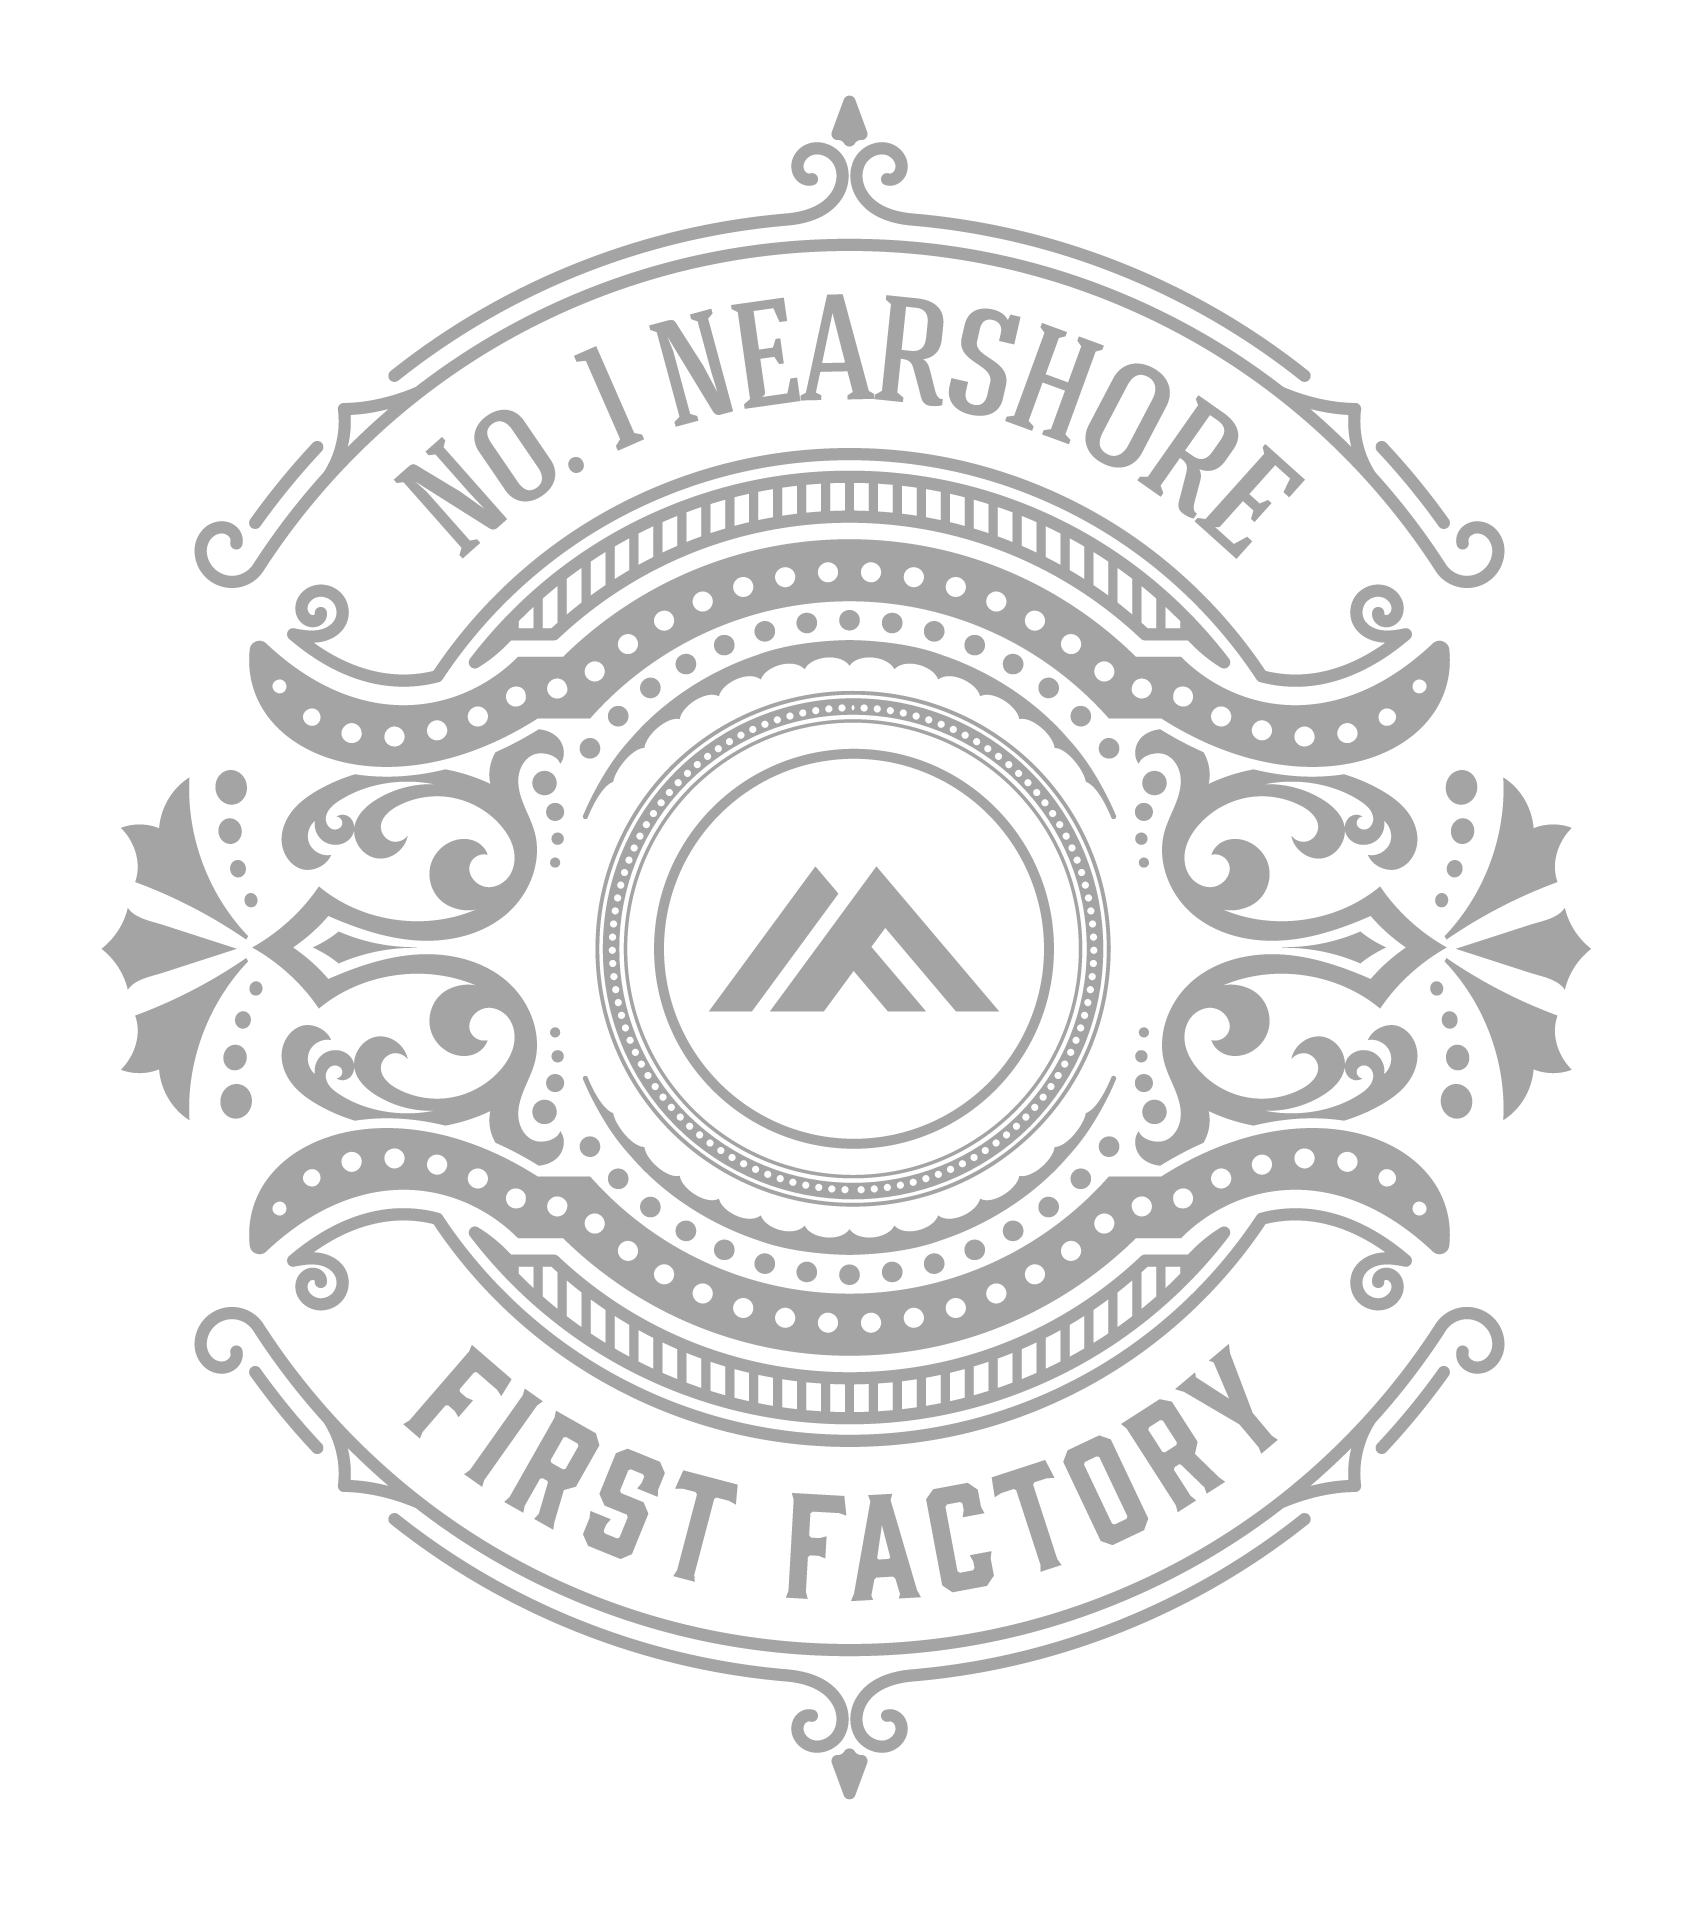 First Factory stamp reads 'No. 1 Nearshore' at the top, then the logo in the center and below says 'First Factory